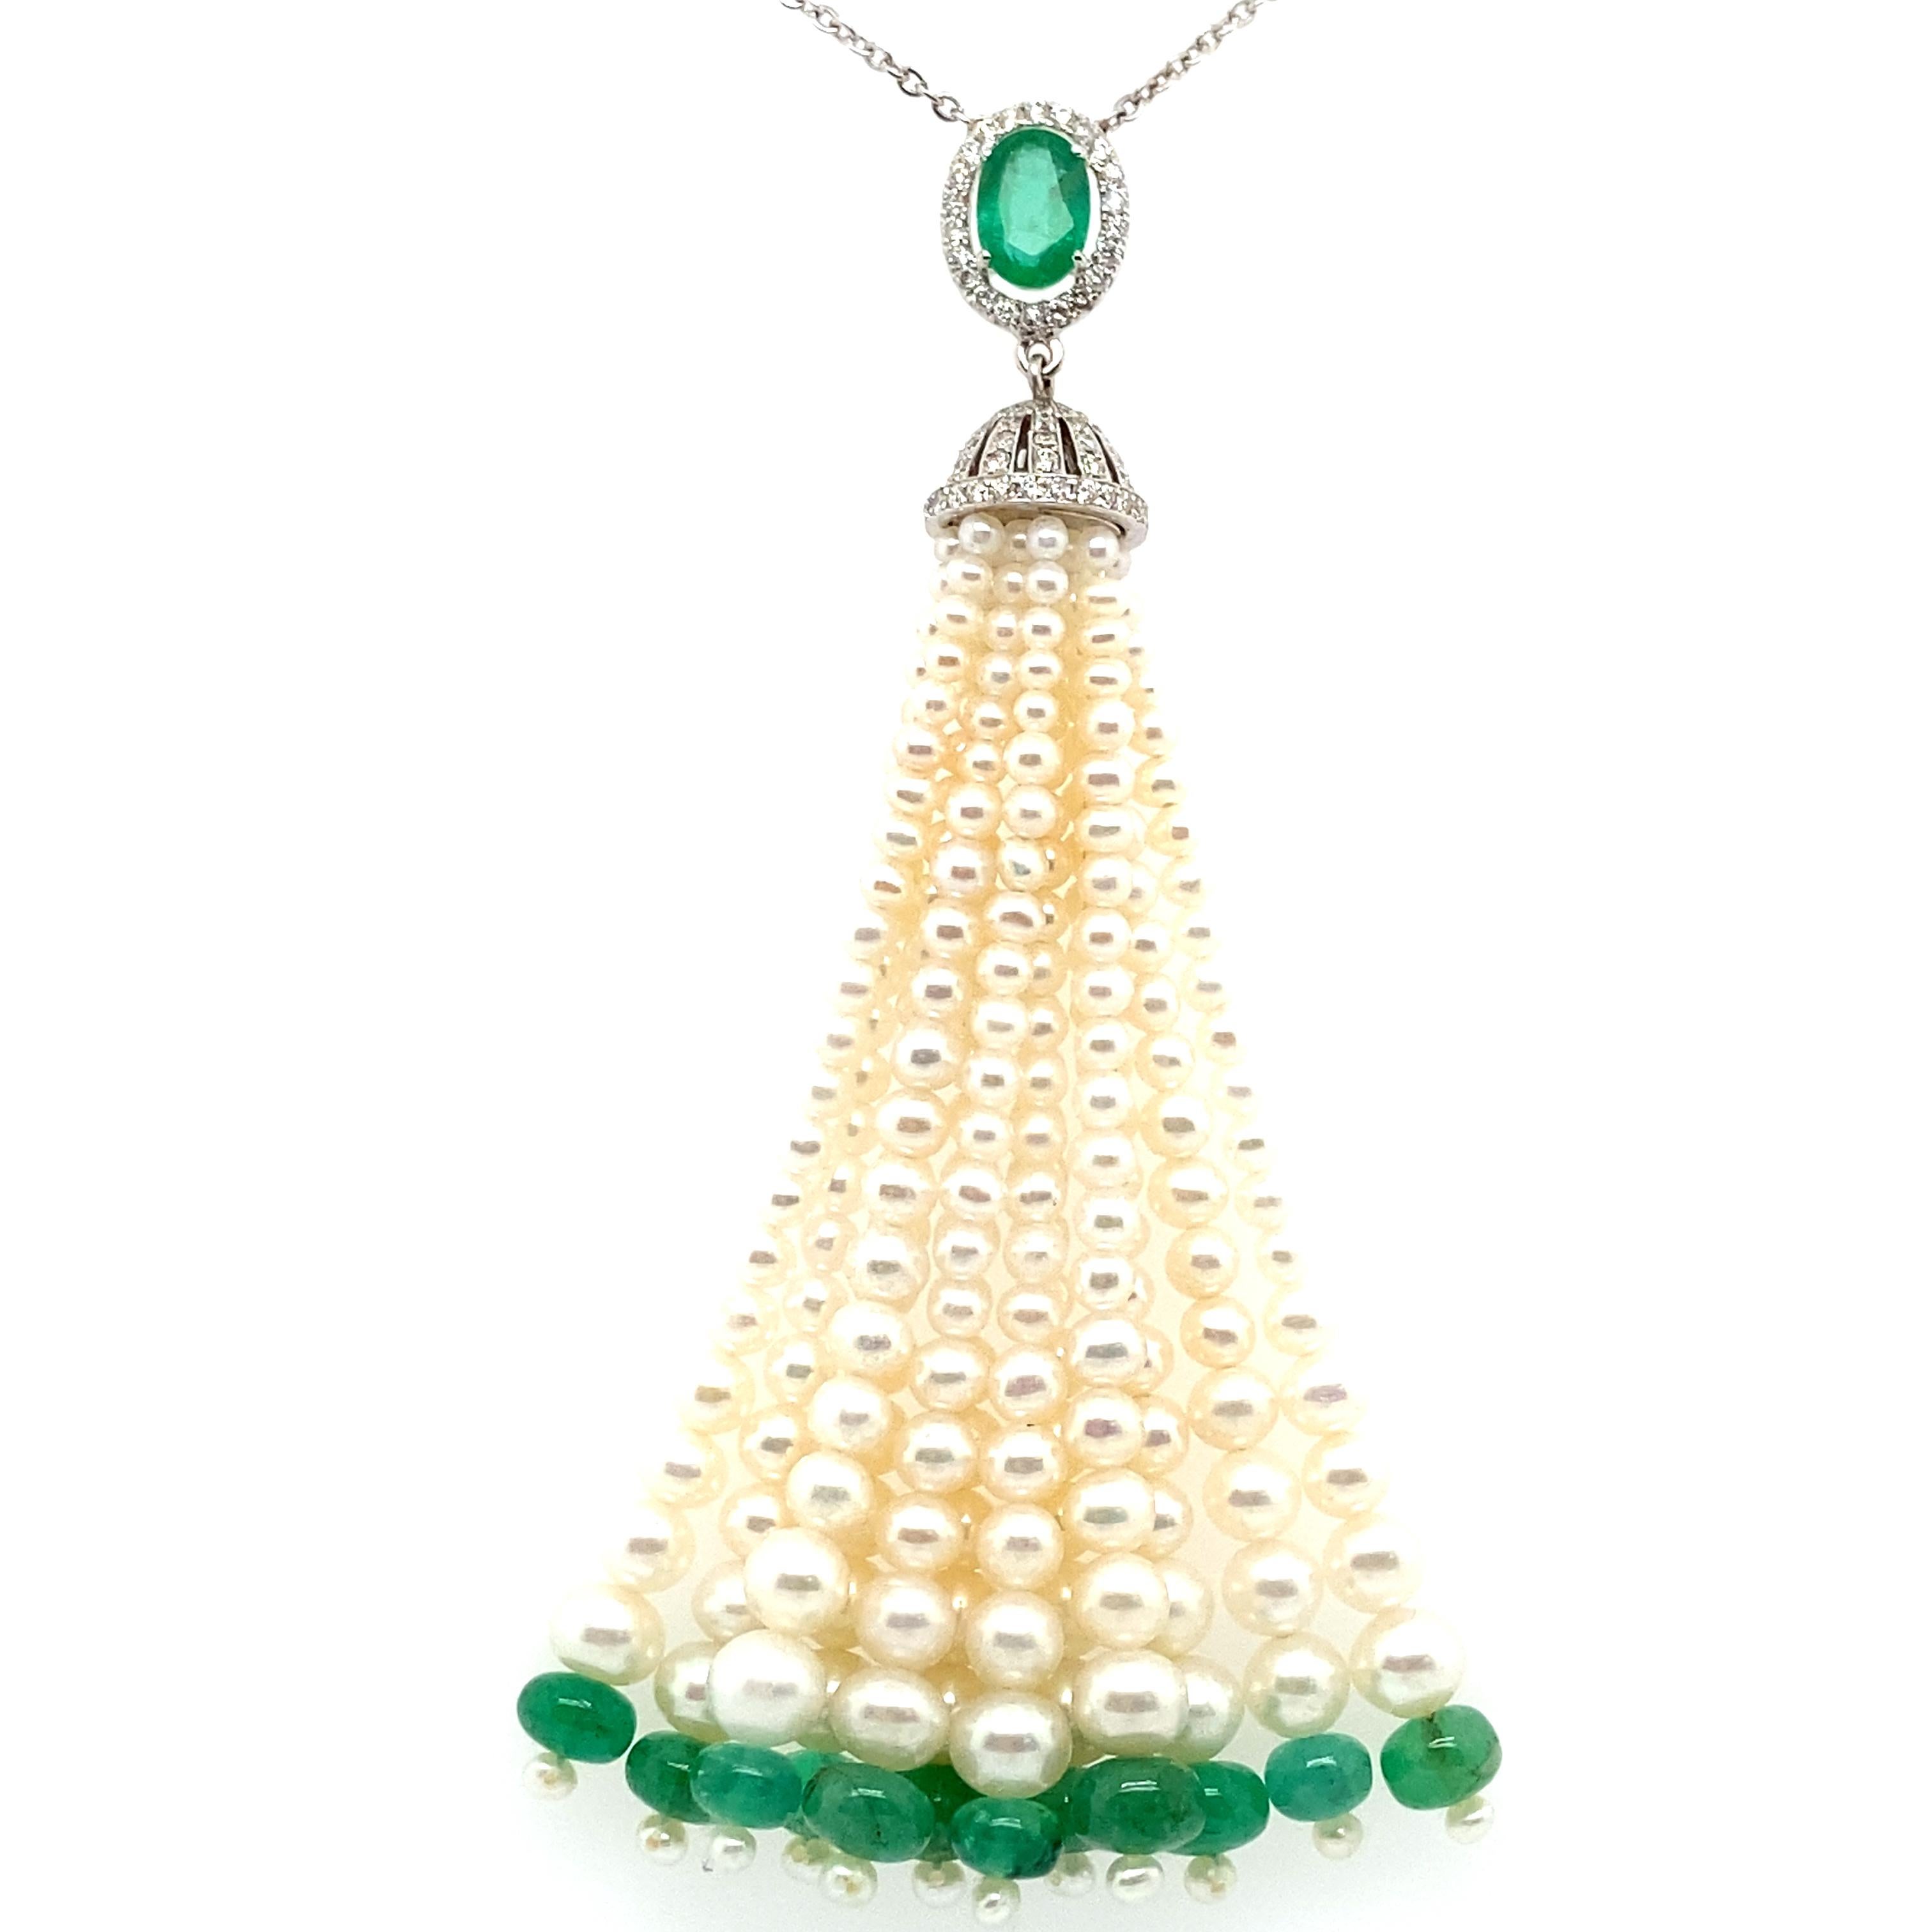 pearls and emerald necklace